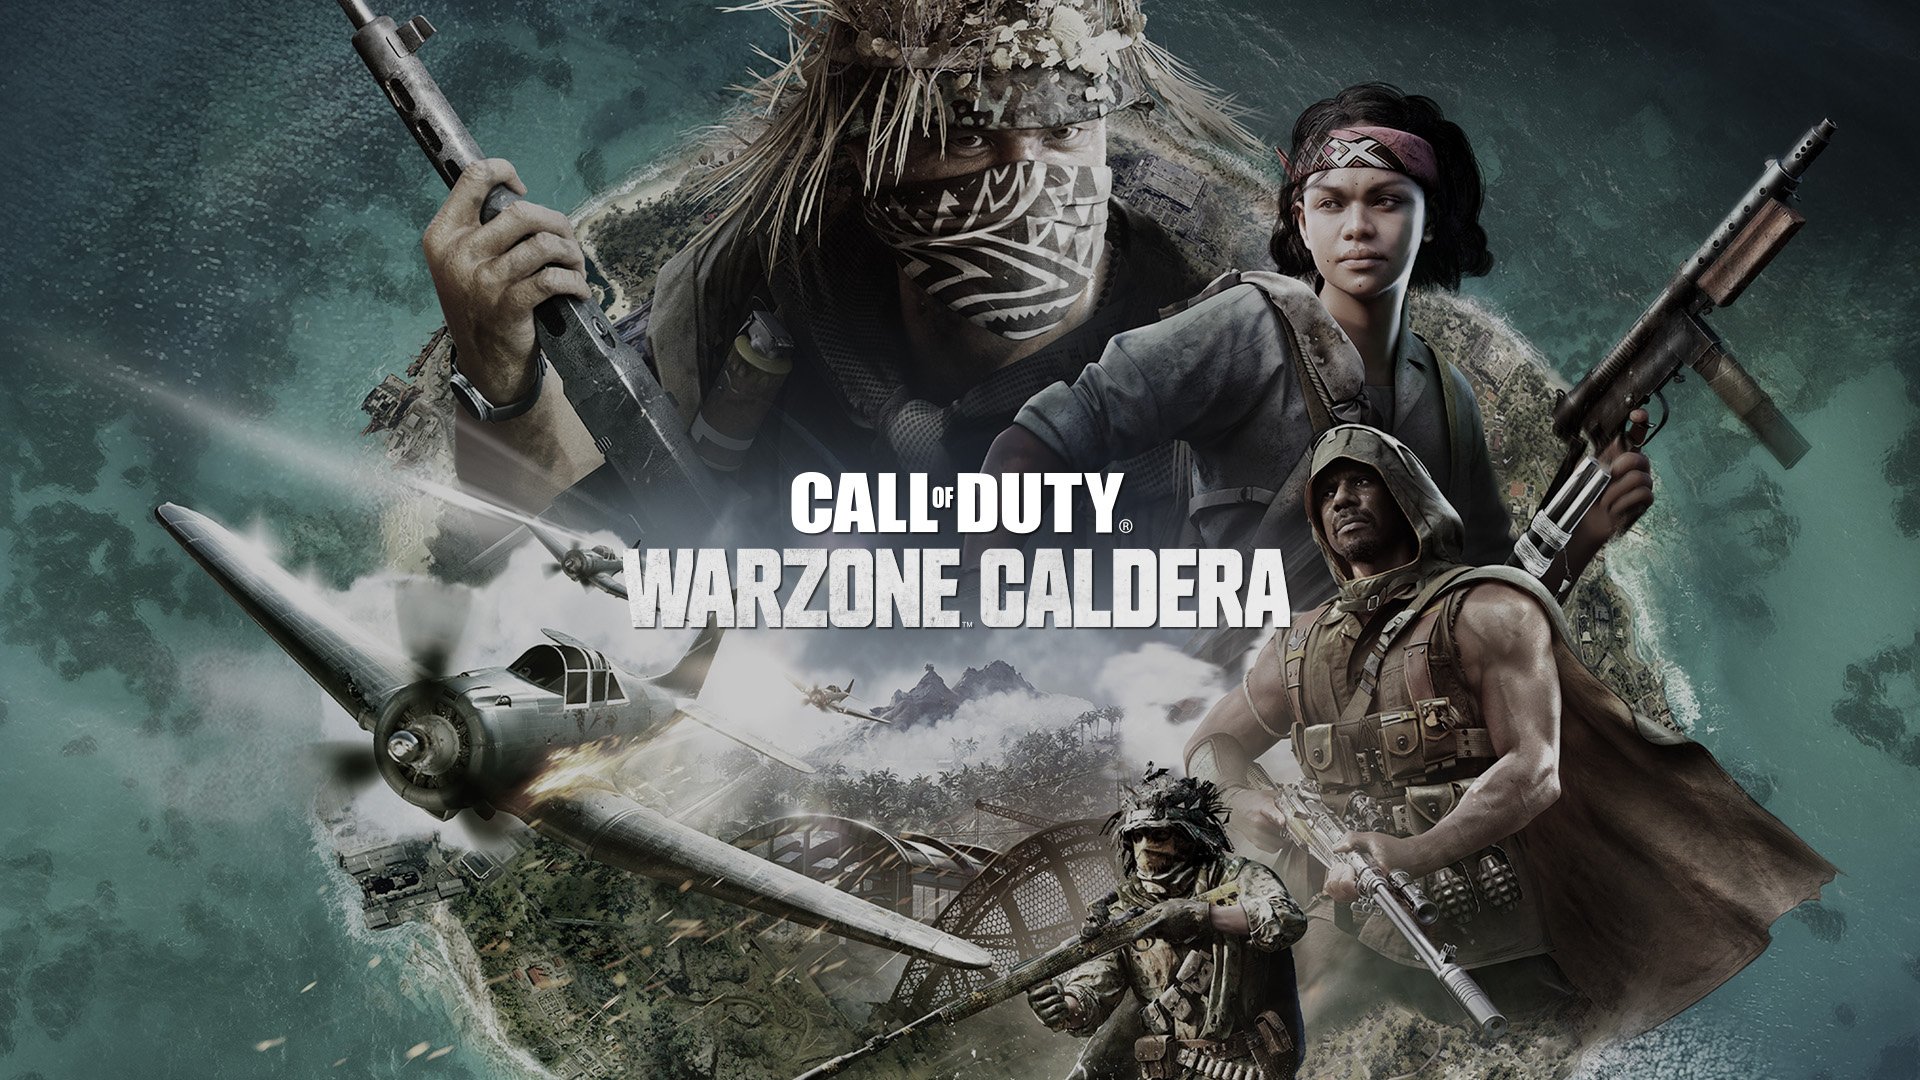 Call of Duty Warzone, Battle Royale grátis, tem online pago no